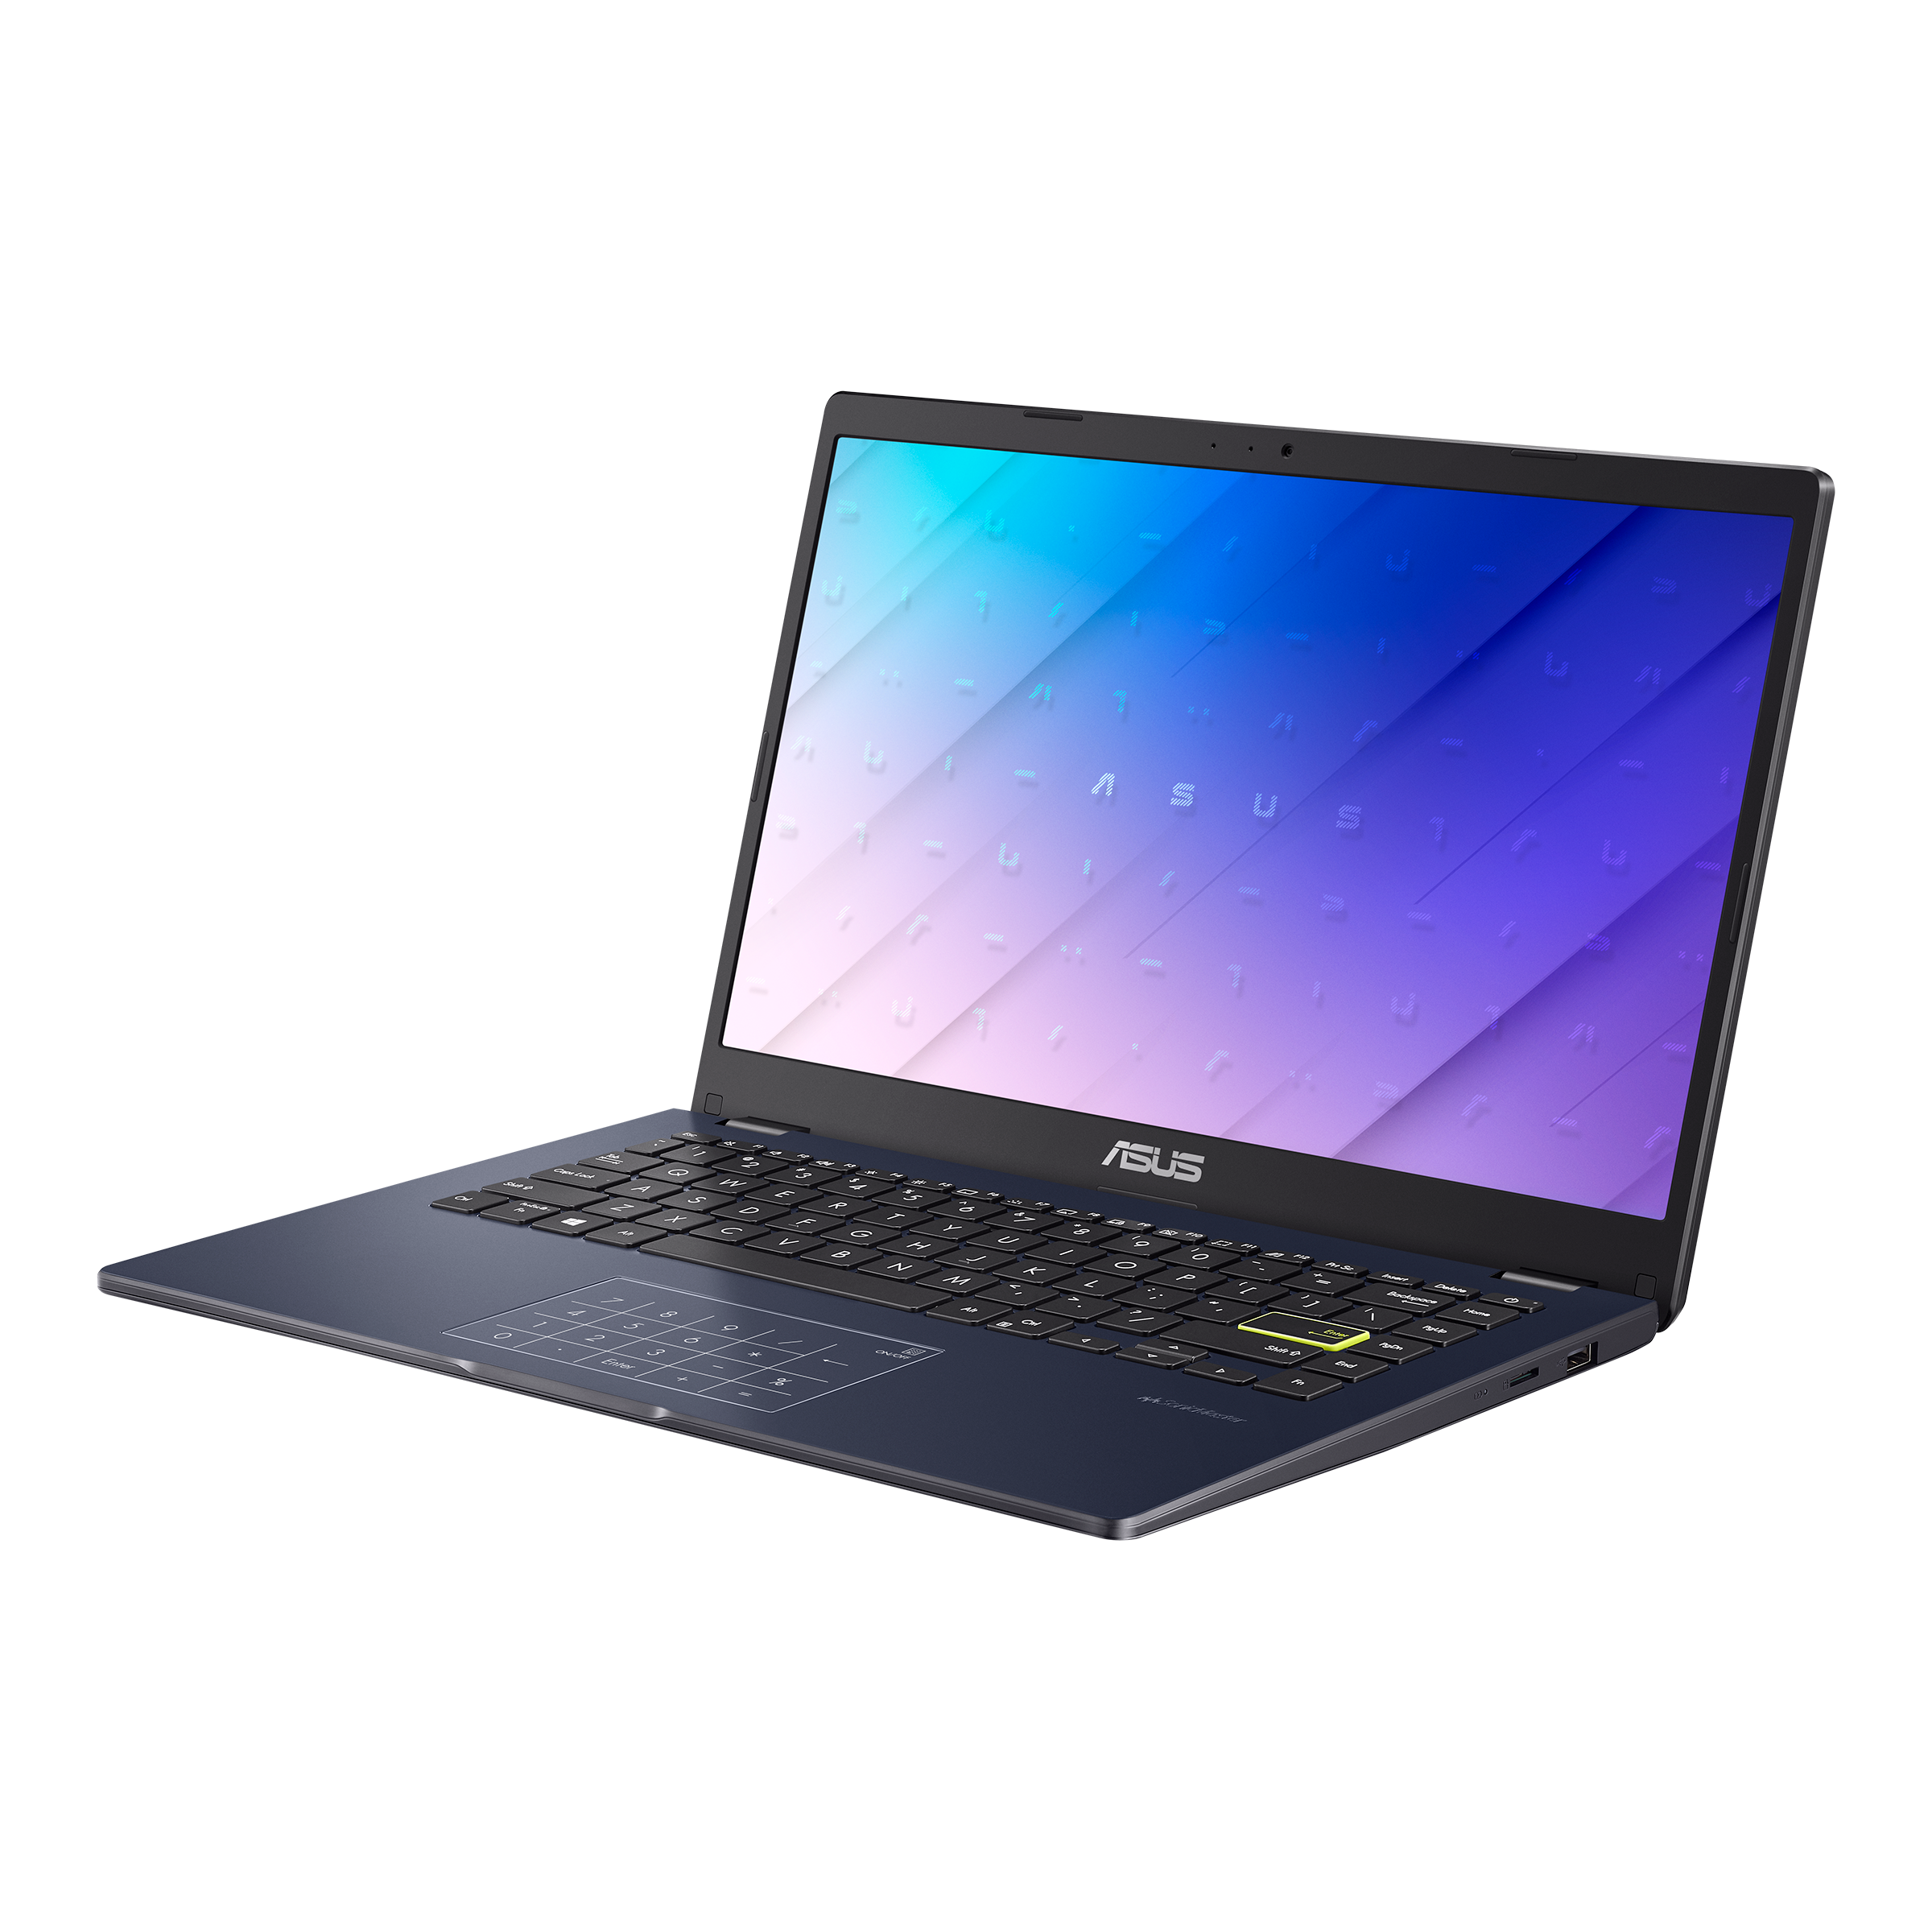 Asus E410 Laptops For Home Asus Indonesia